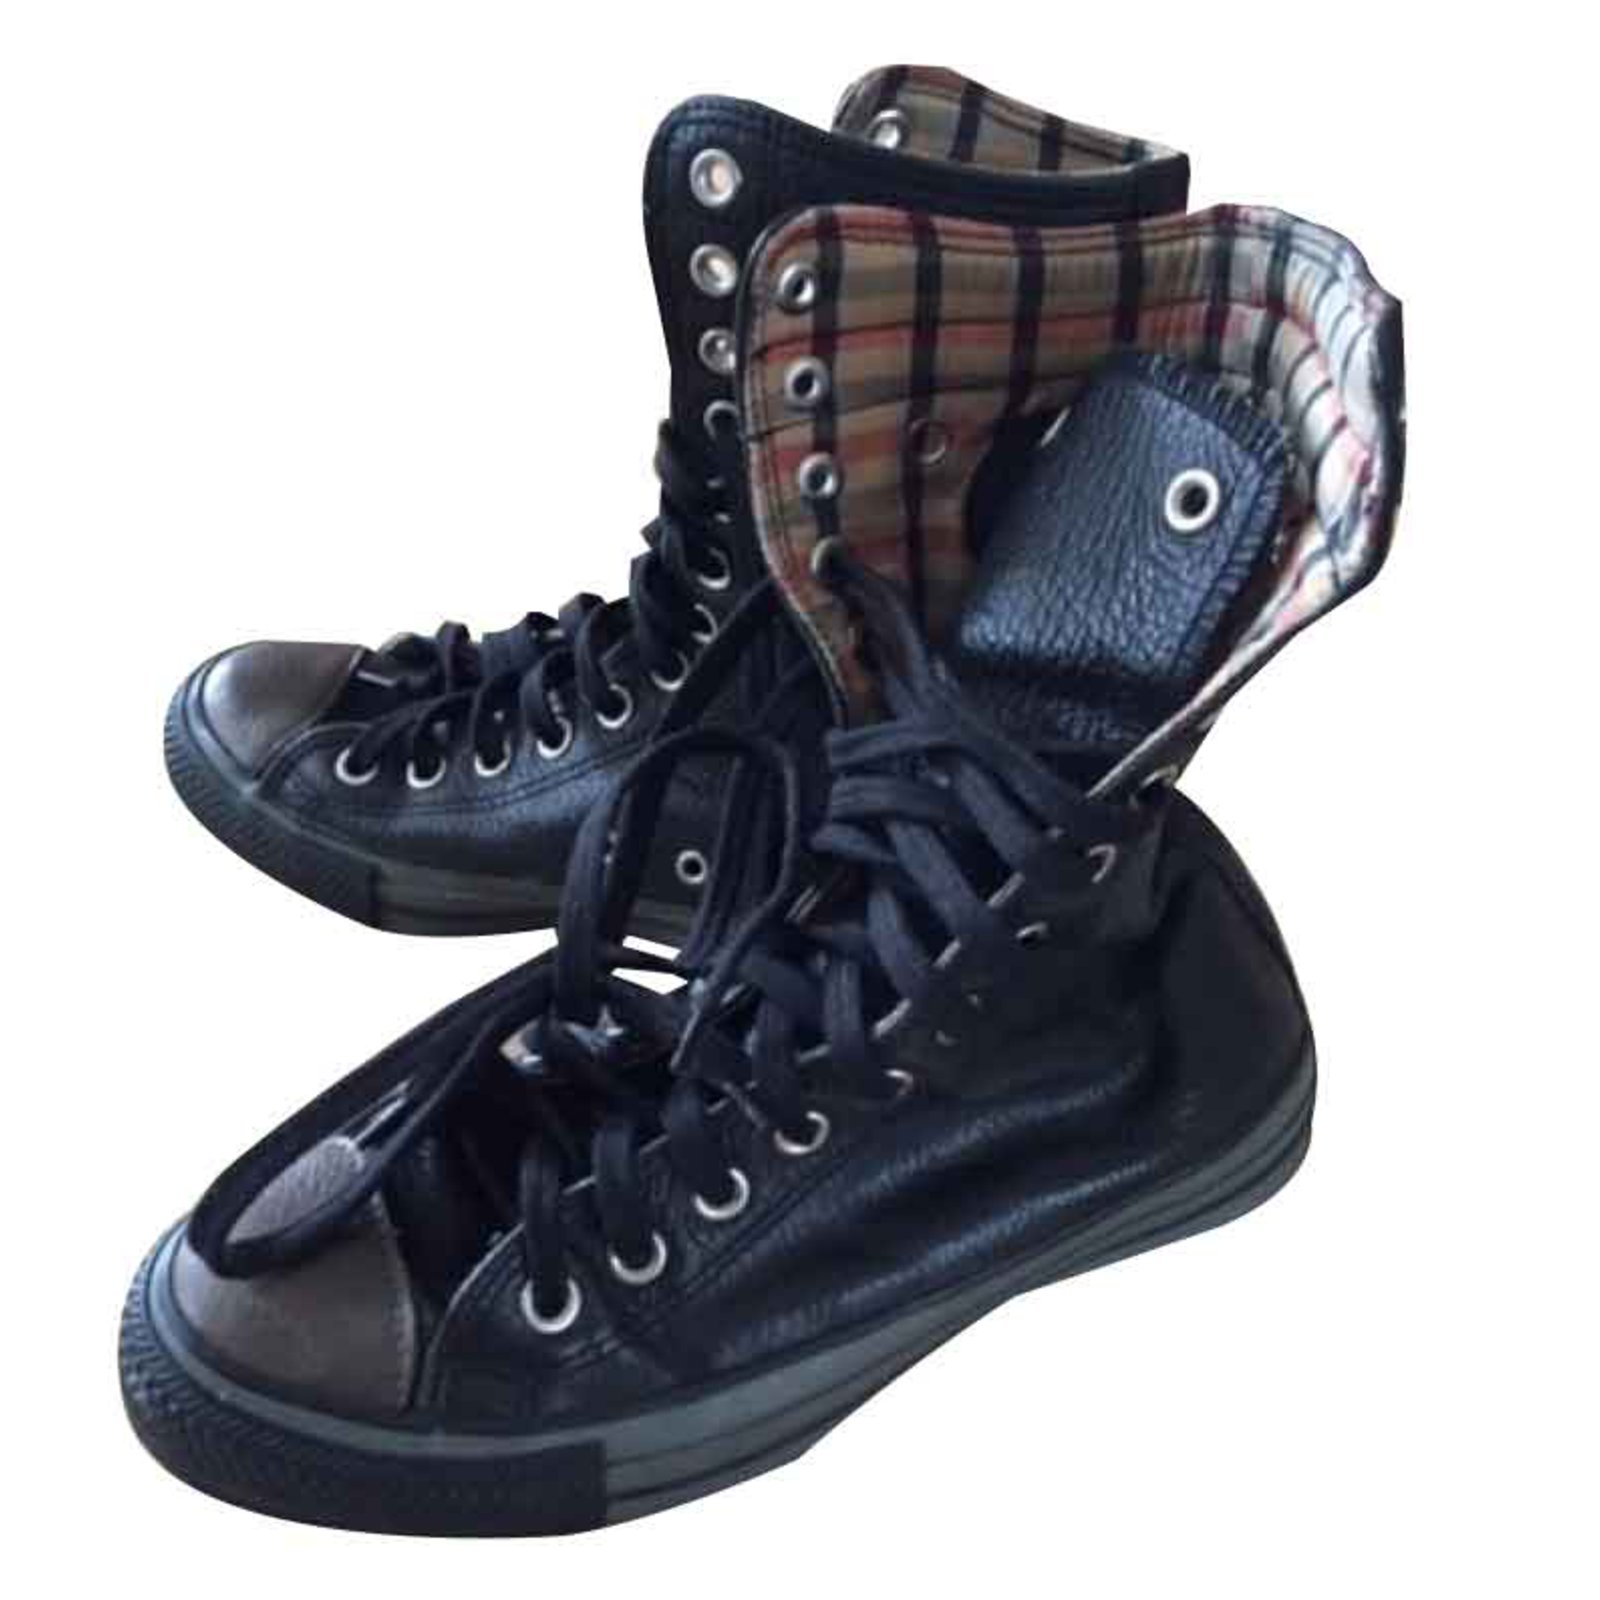 new converse leather boots